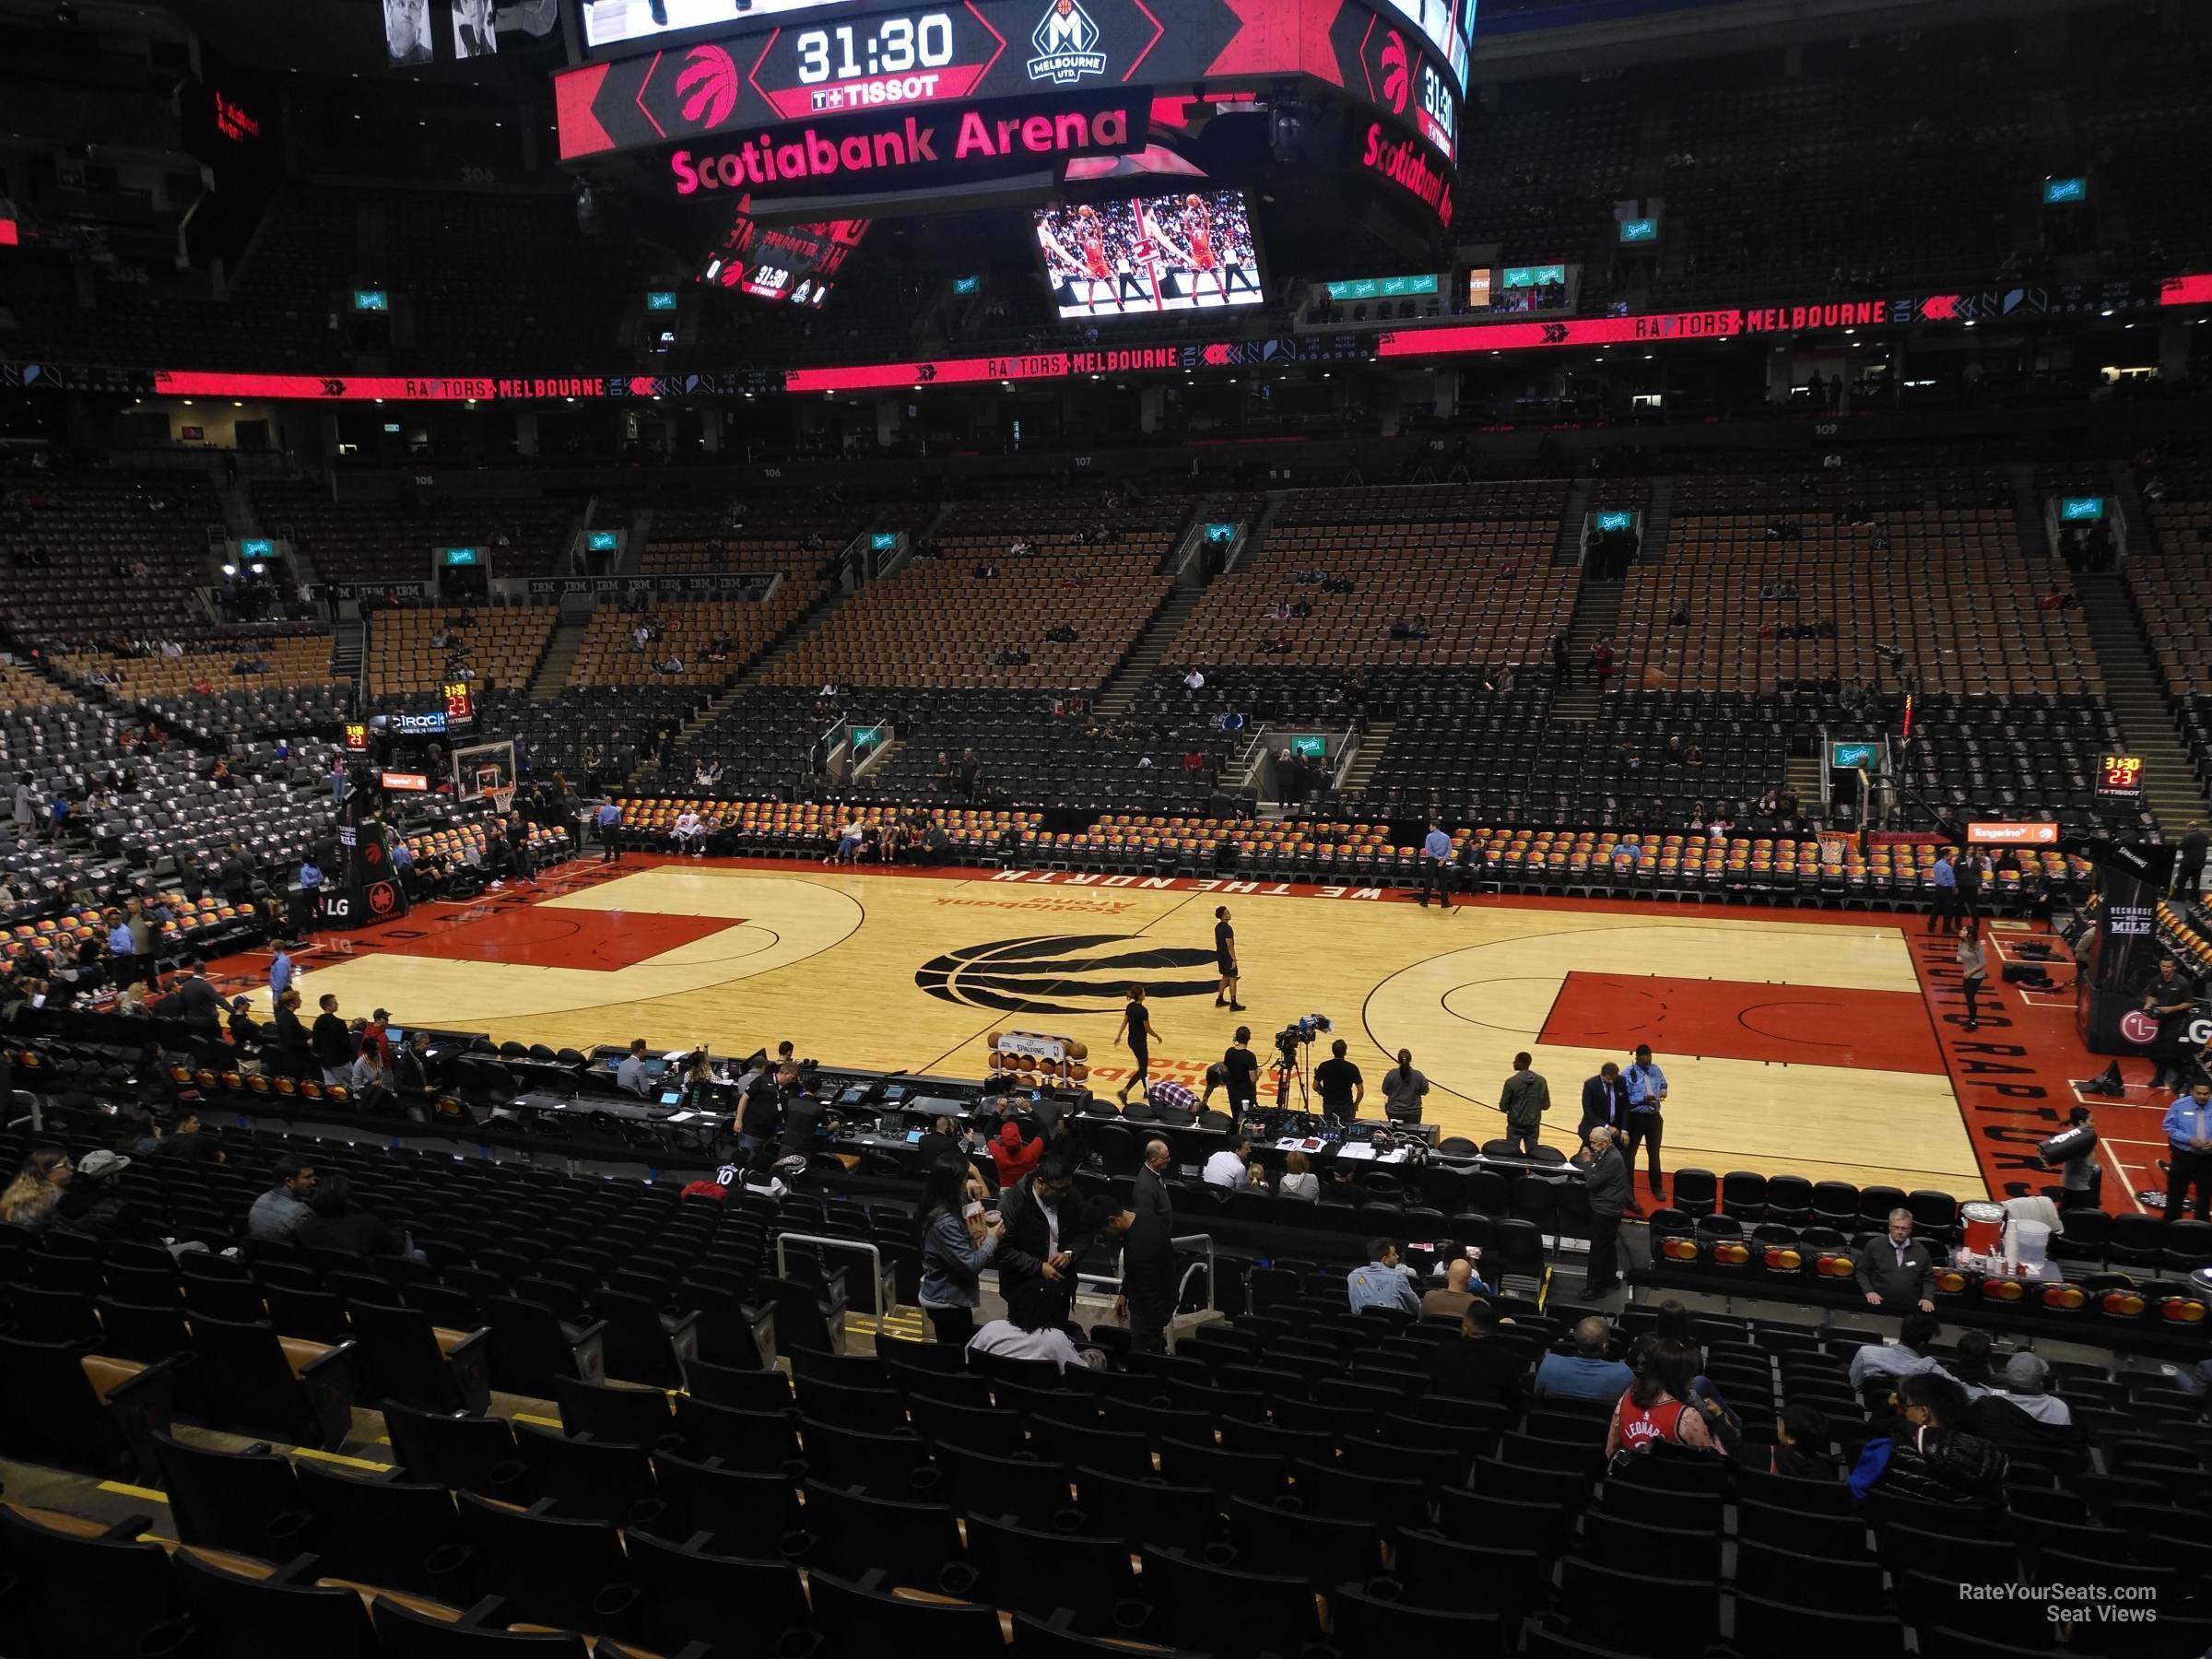 section 118, row 28 seat view  for basketball - scotiabank arena